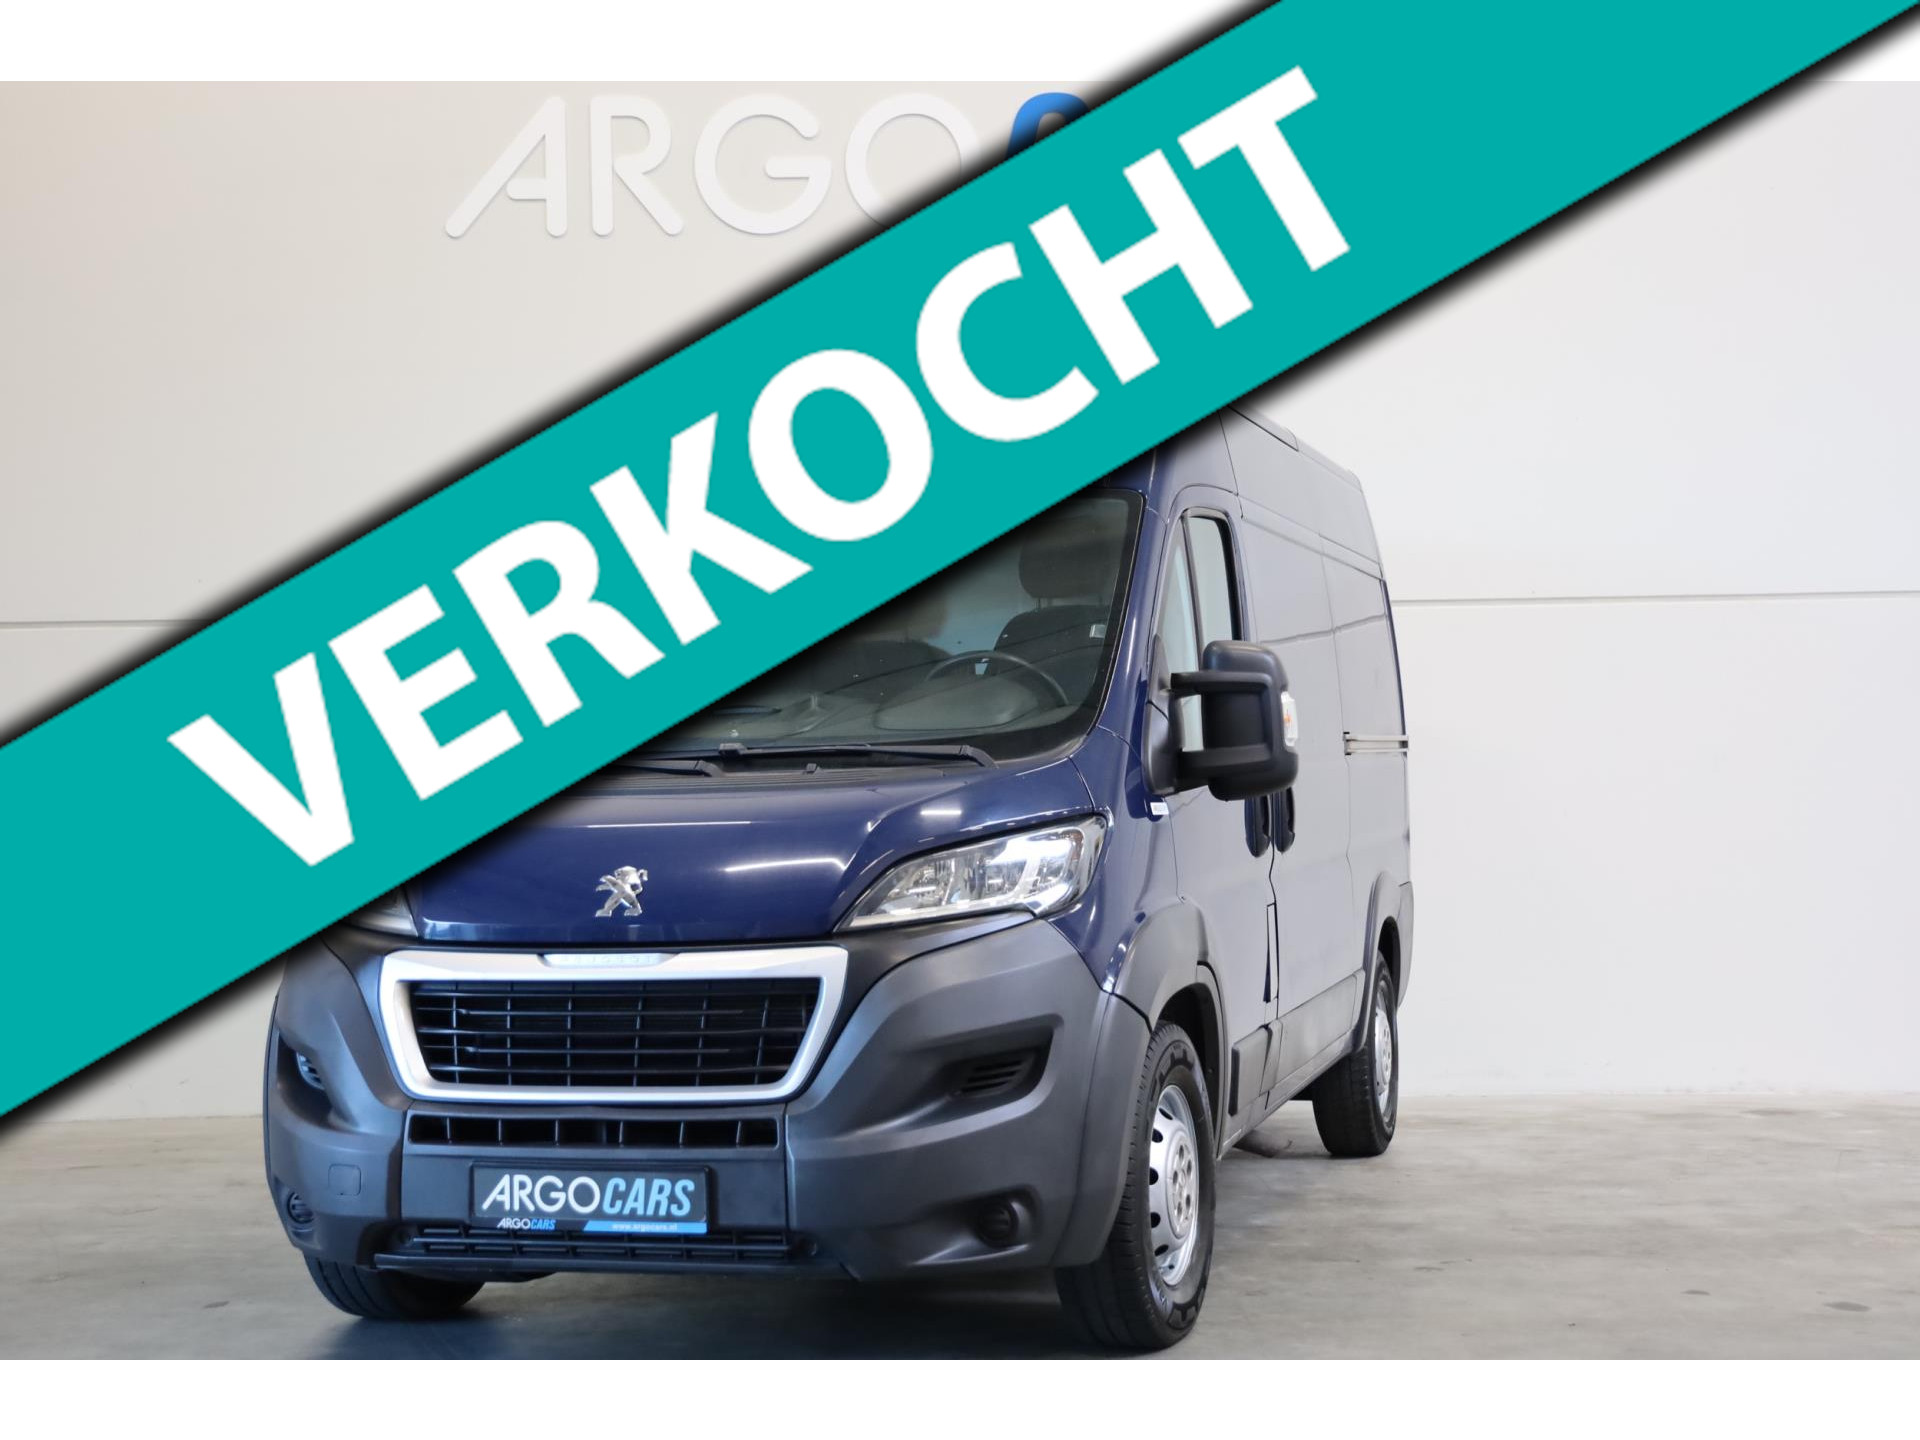 Peugeot Boxer 2.2 HDI L2/H2 XR NAP AIRCO CAMERA TREKHAAK CRUISE CONTROL TOPSTAAT LEASE V/A € 99,- P.M. Bestelauto | 297.884 km | 2015 | 150 pk